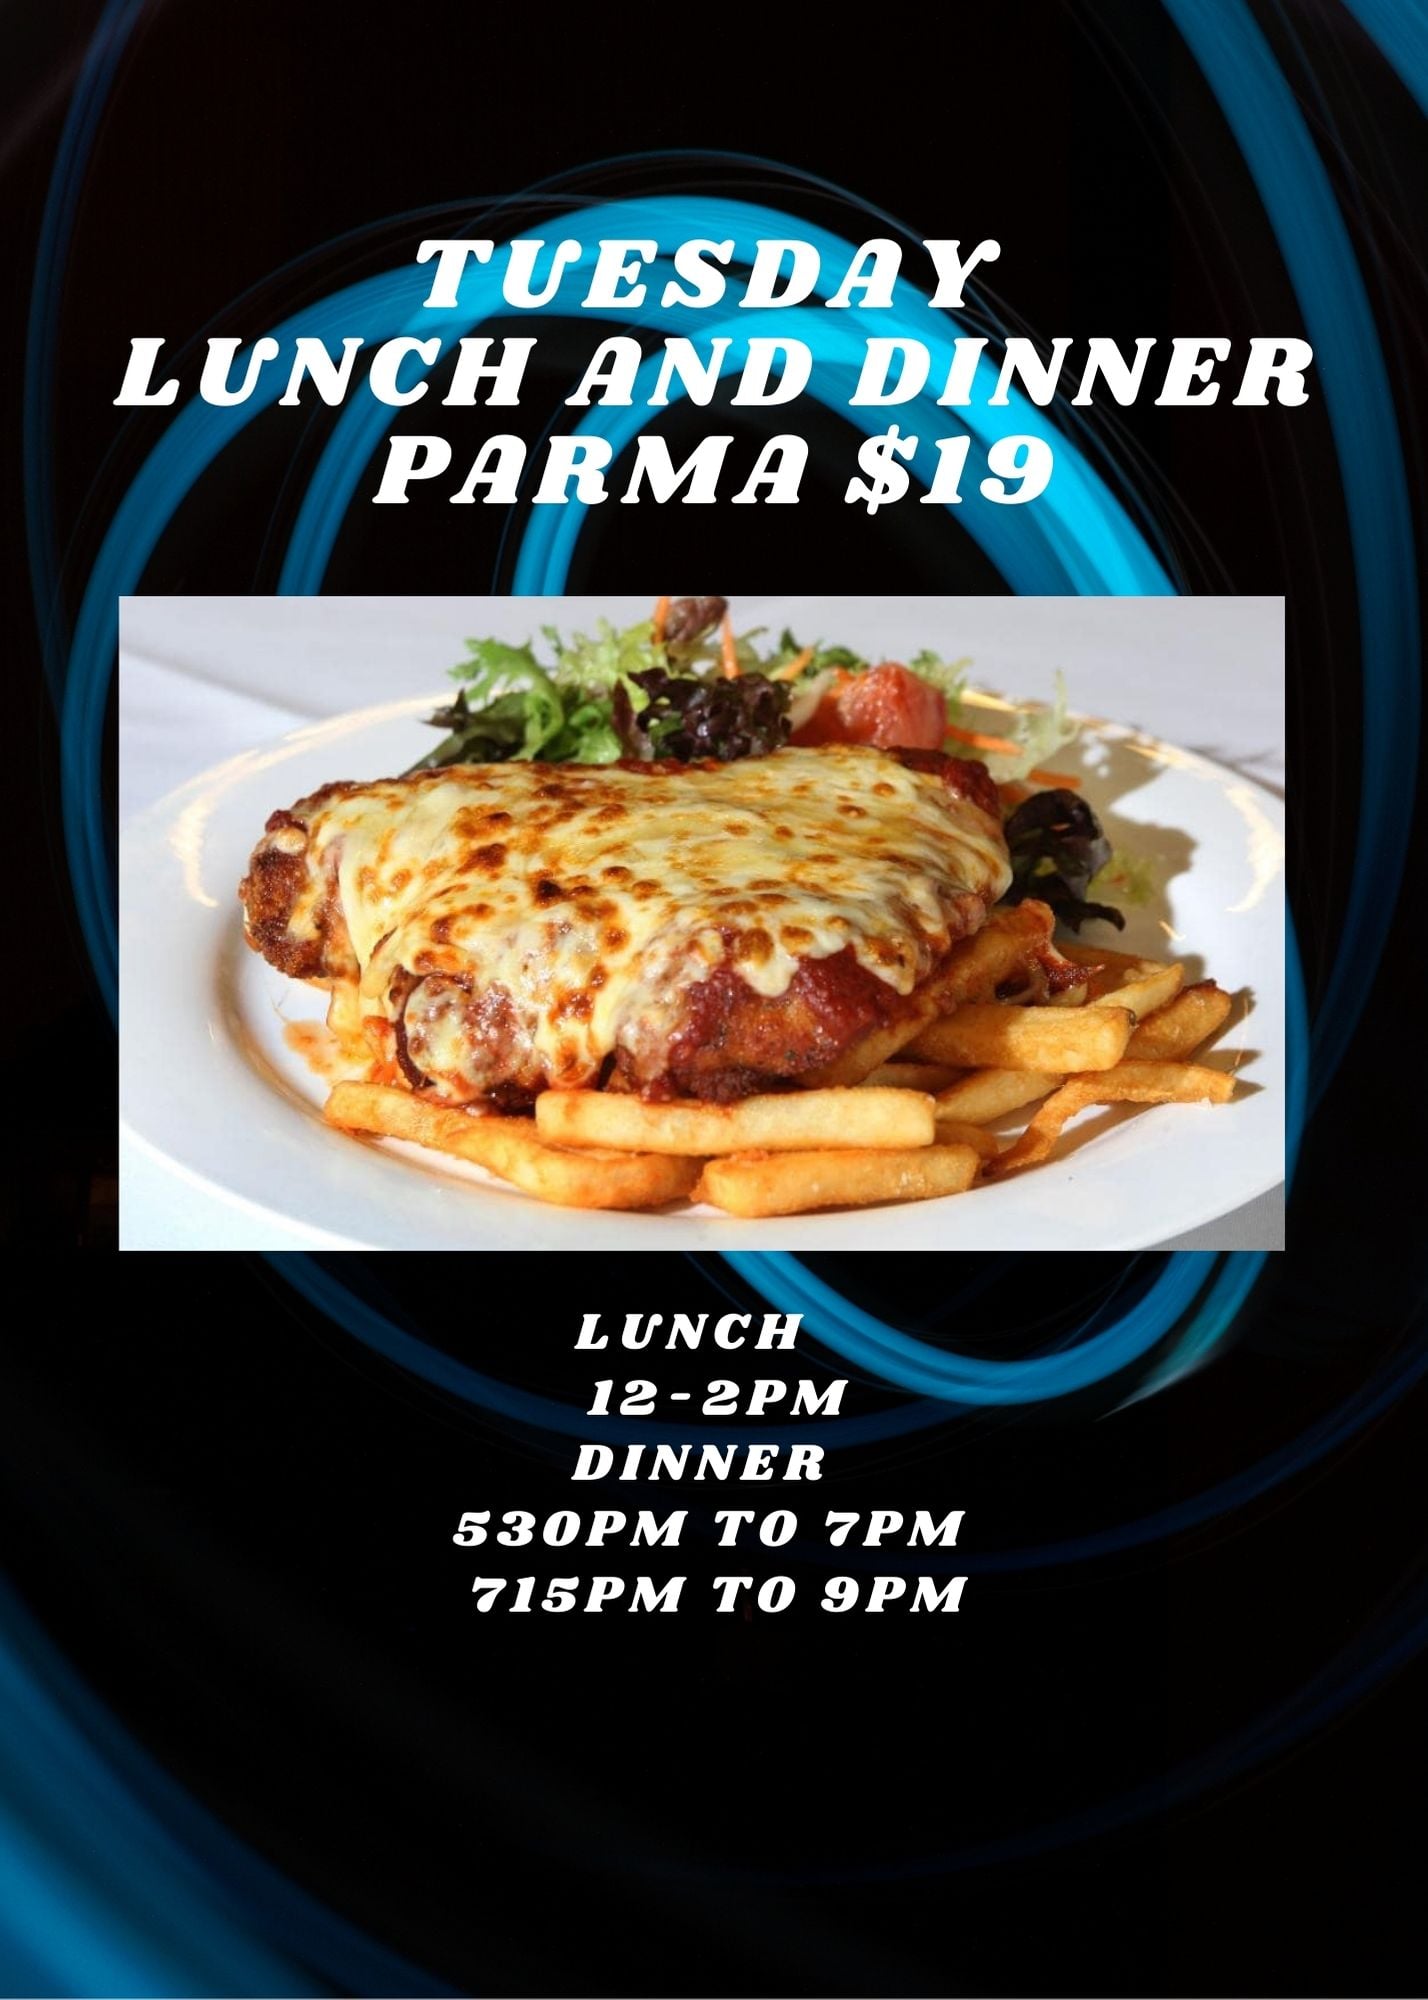 Blazing Stump Hotel - Family pub dining Wodonga - What's On - Speciality Nights